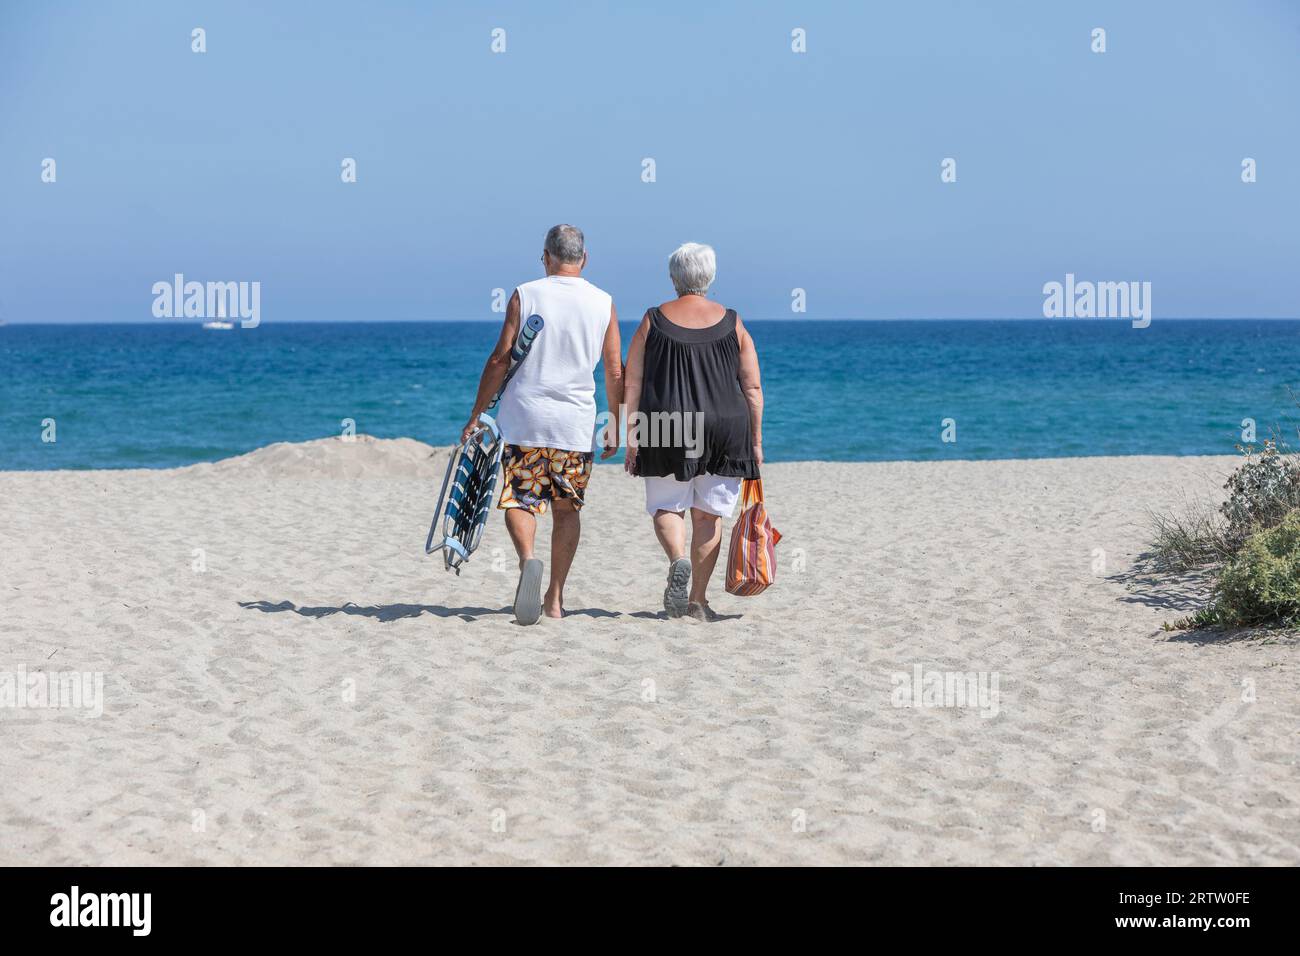 A couple walking onto a deserted sandy Mediterranean beach at Le Barcares, South of France Stock Photo